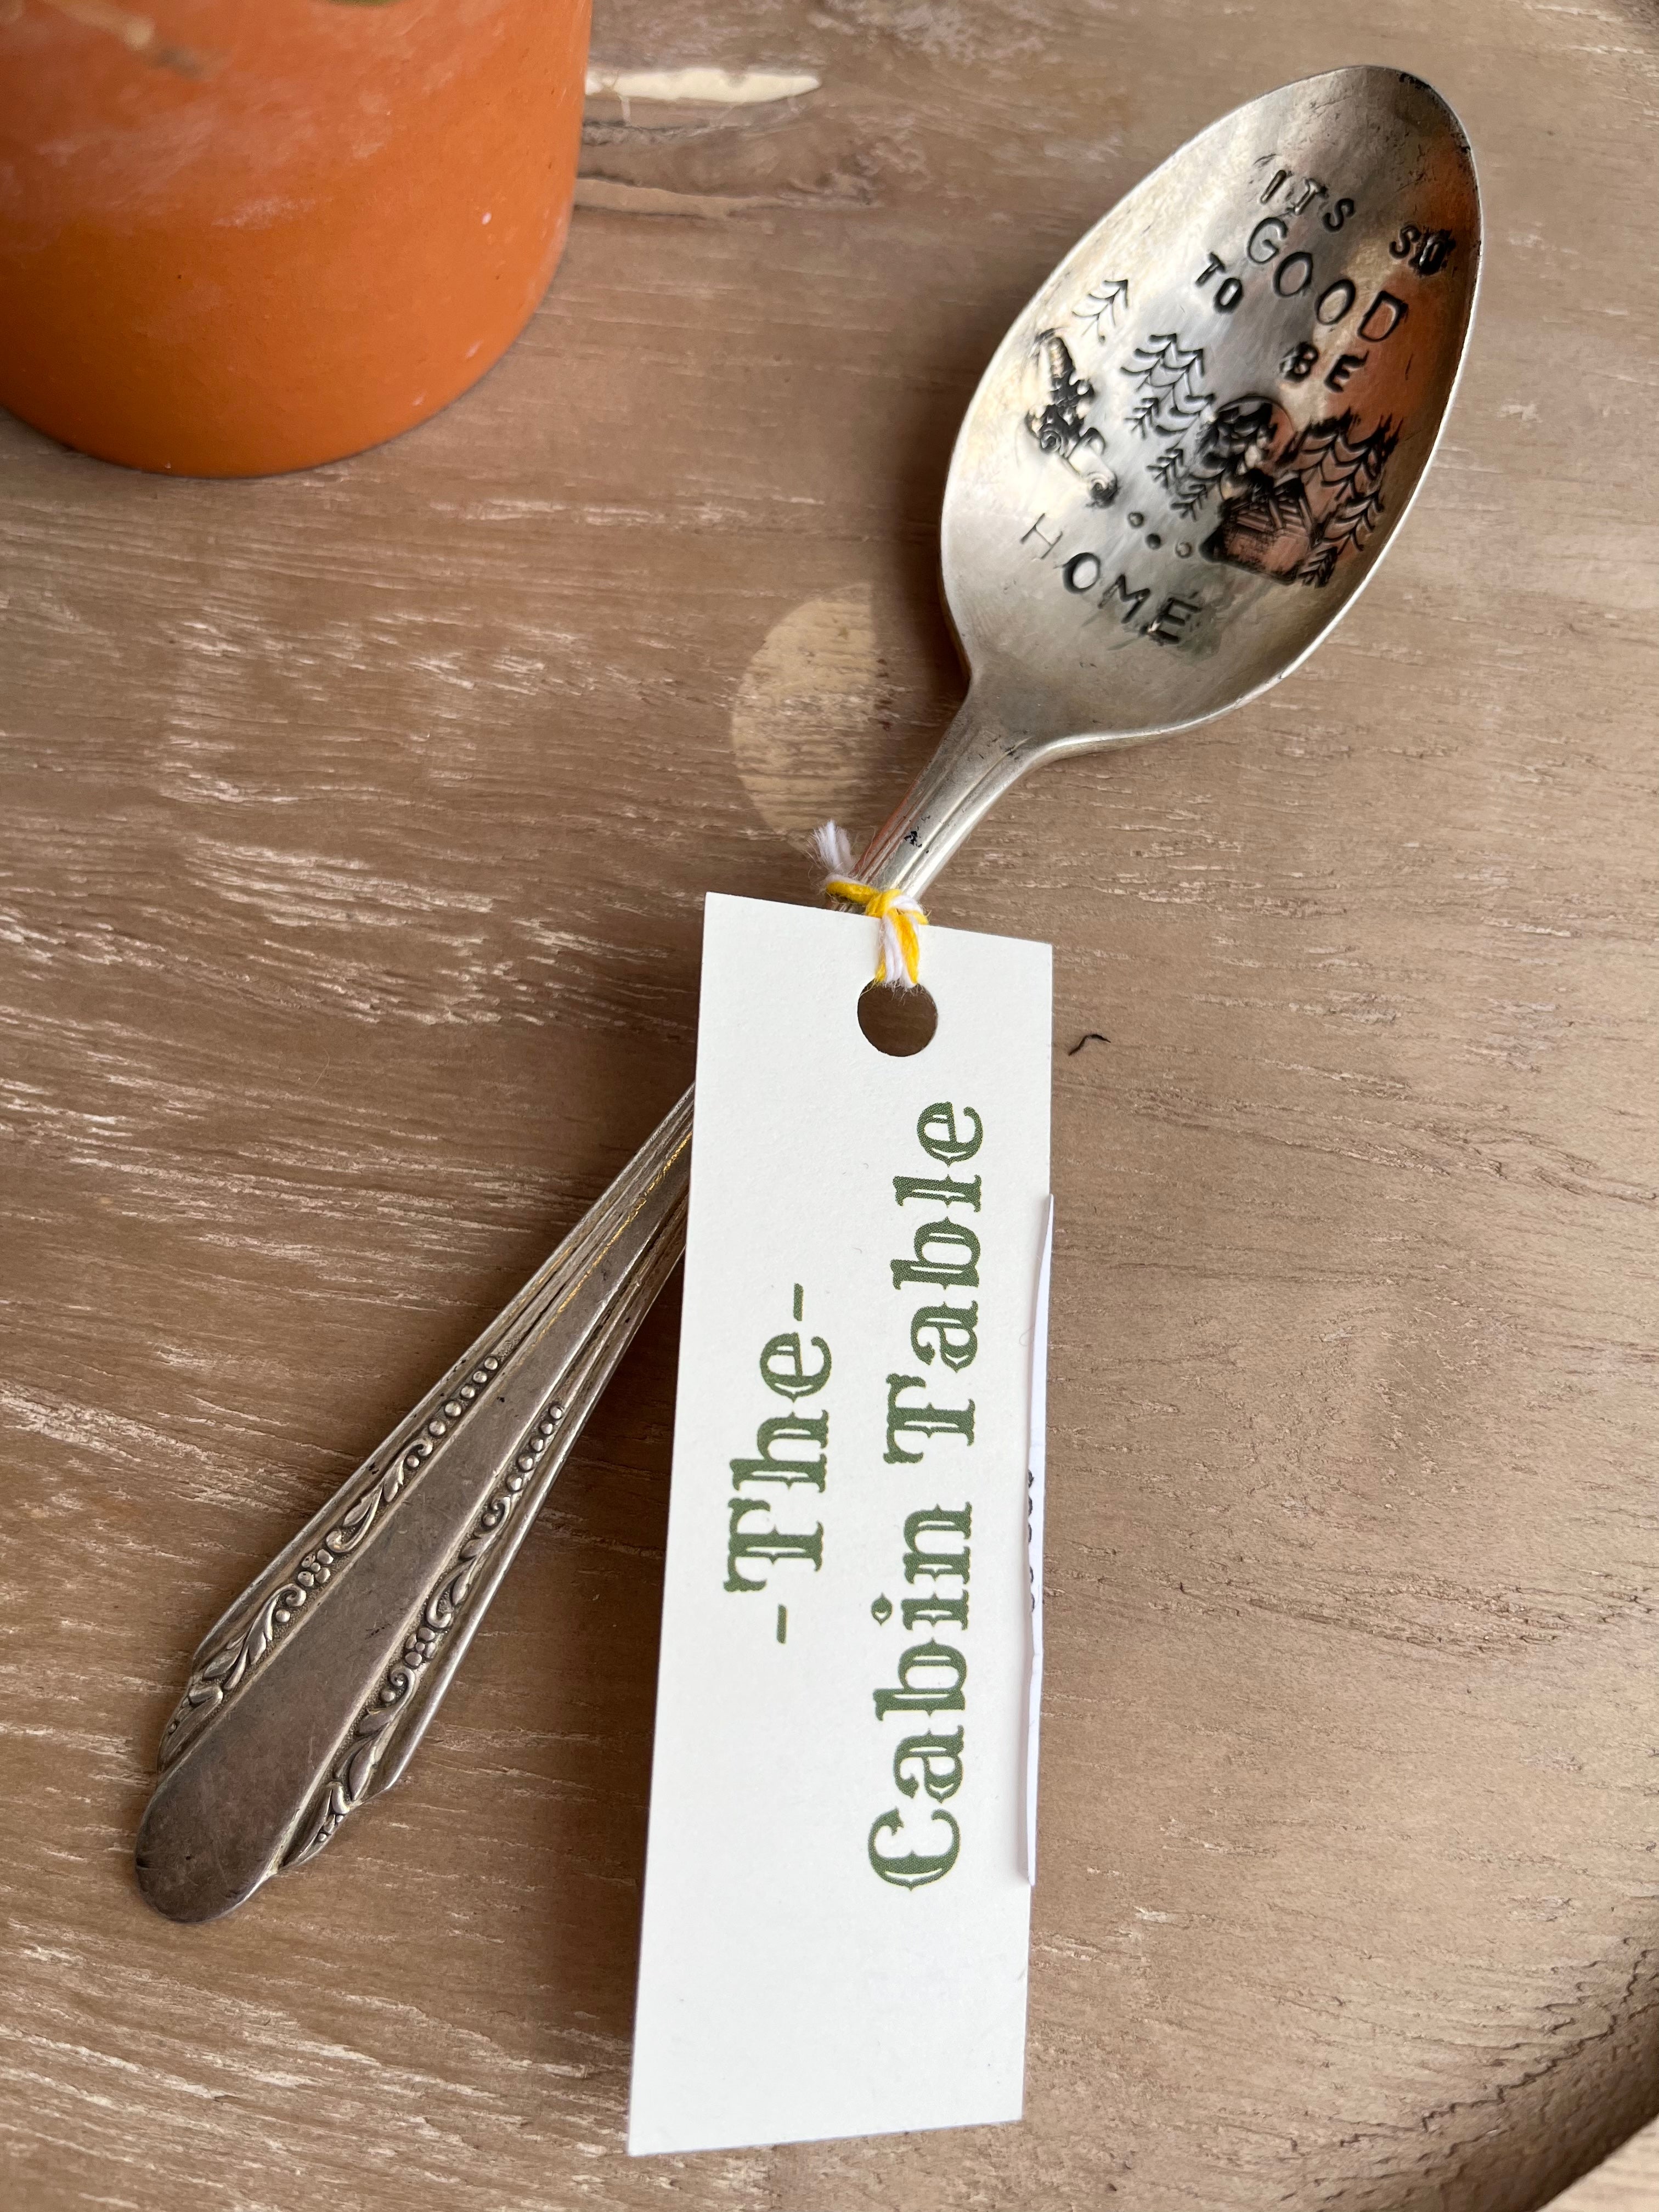 Good to be Home - Stamped Spoons from the Cabin Table